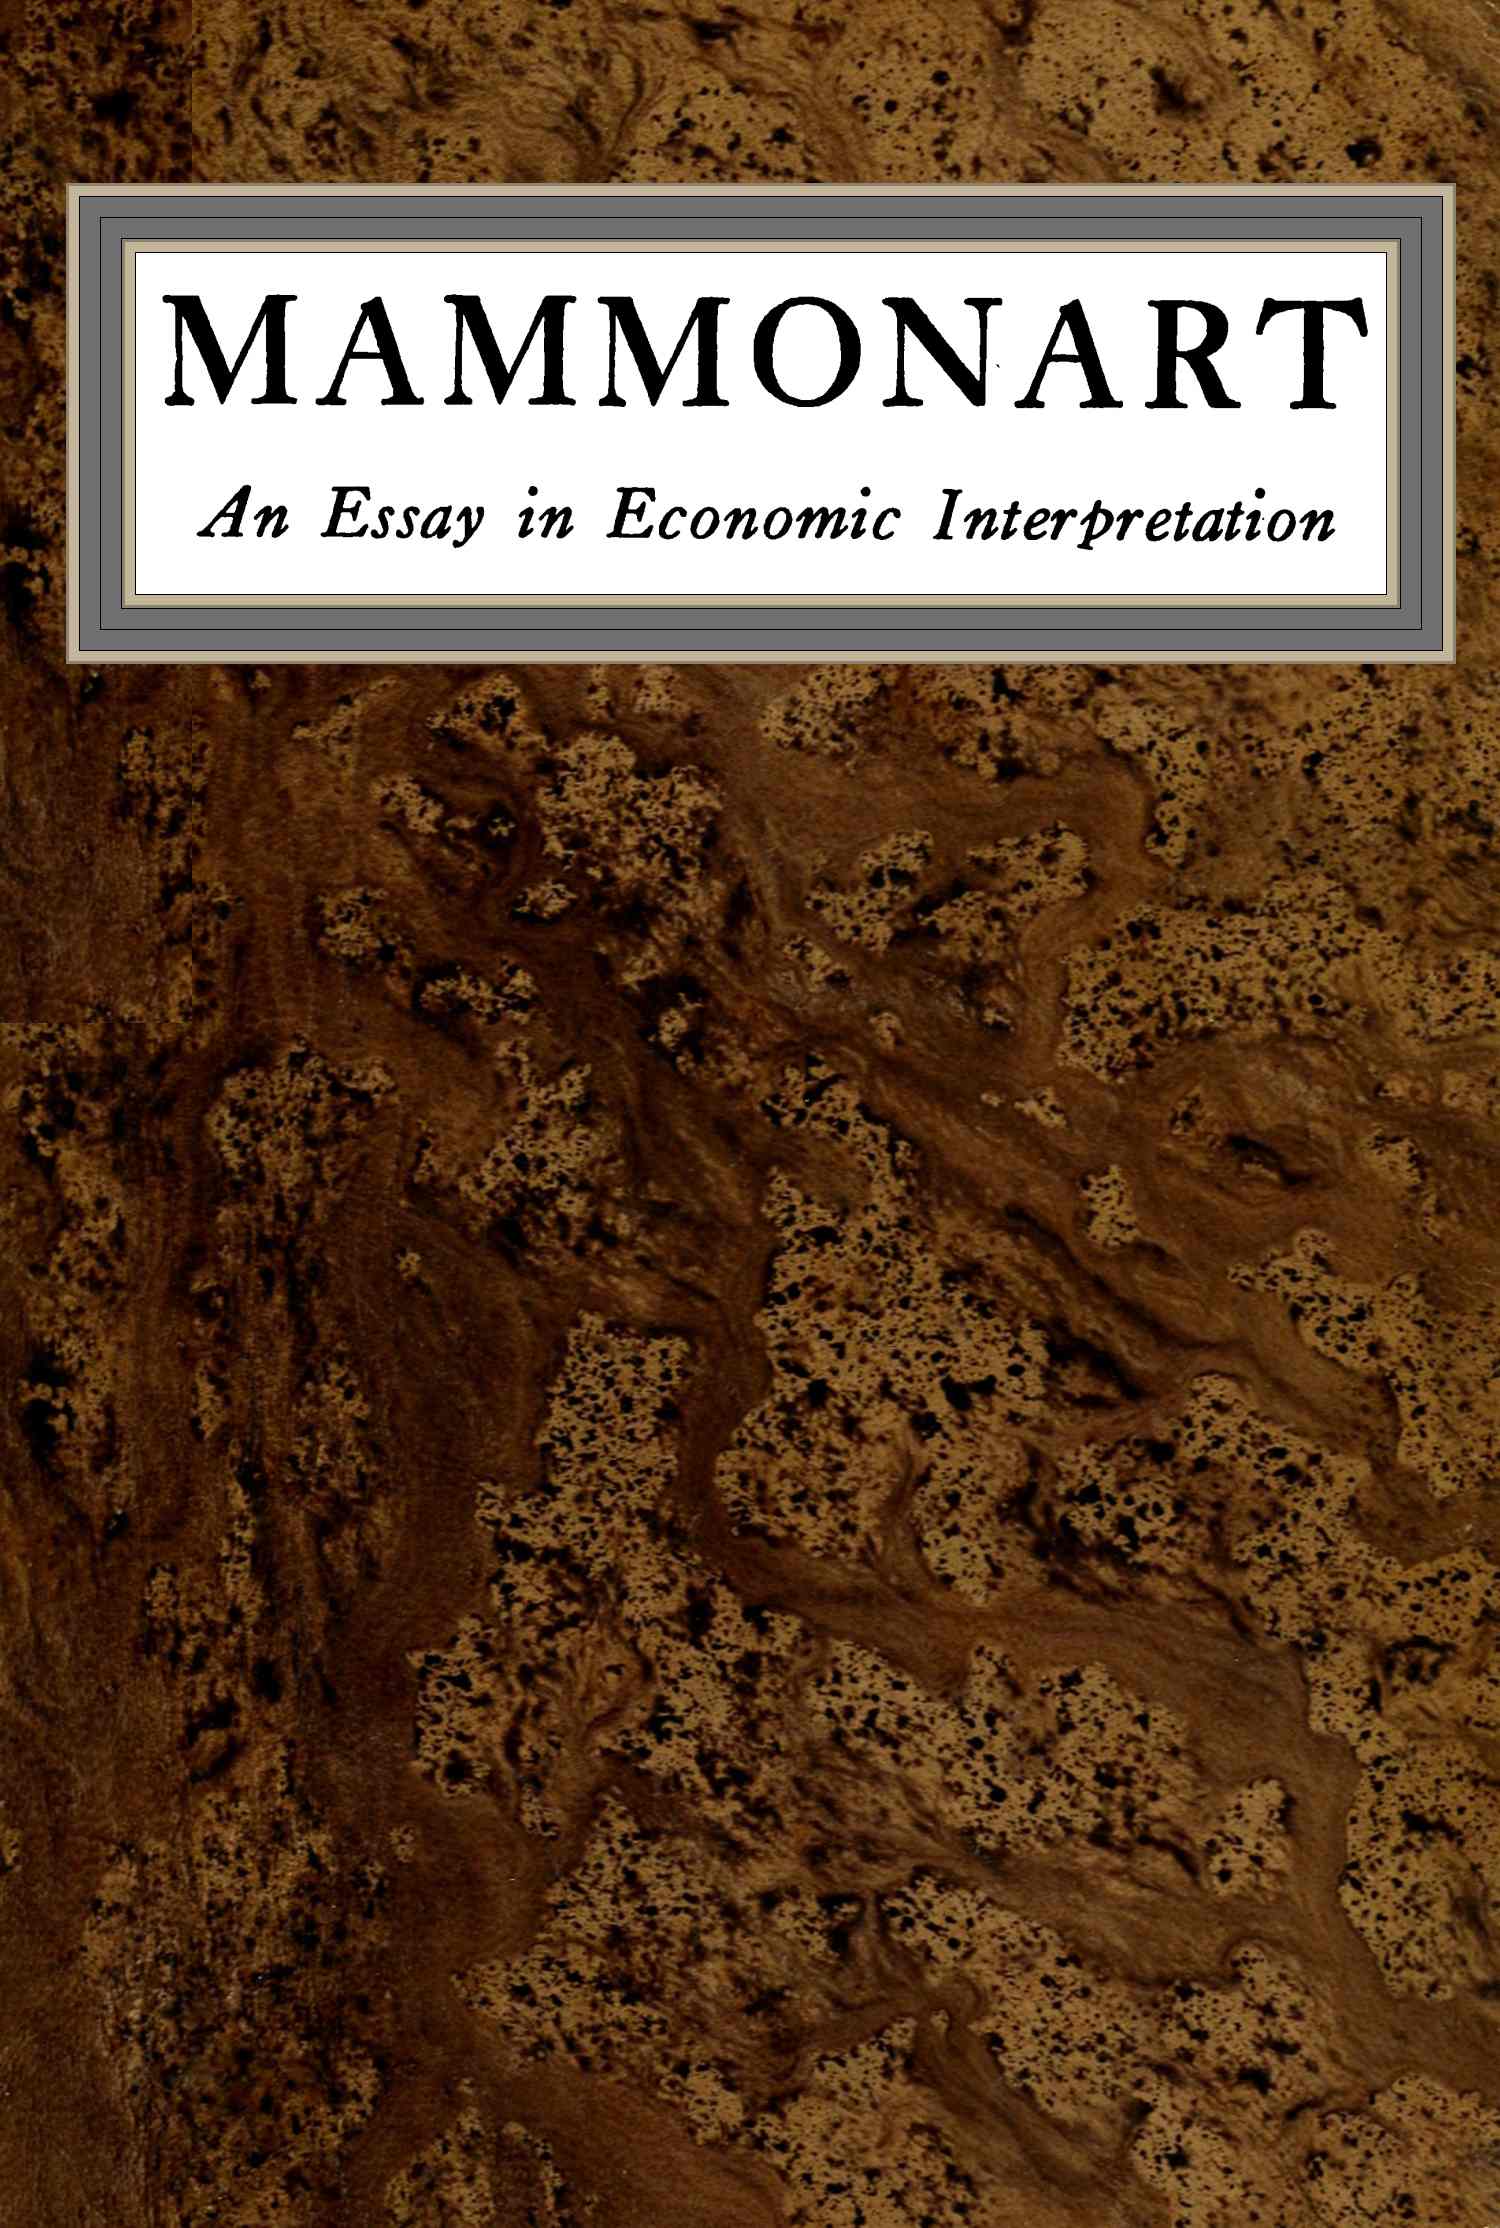 The Immortal Game by Bill Wall, PDF, Abstract Strategy Games